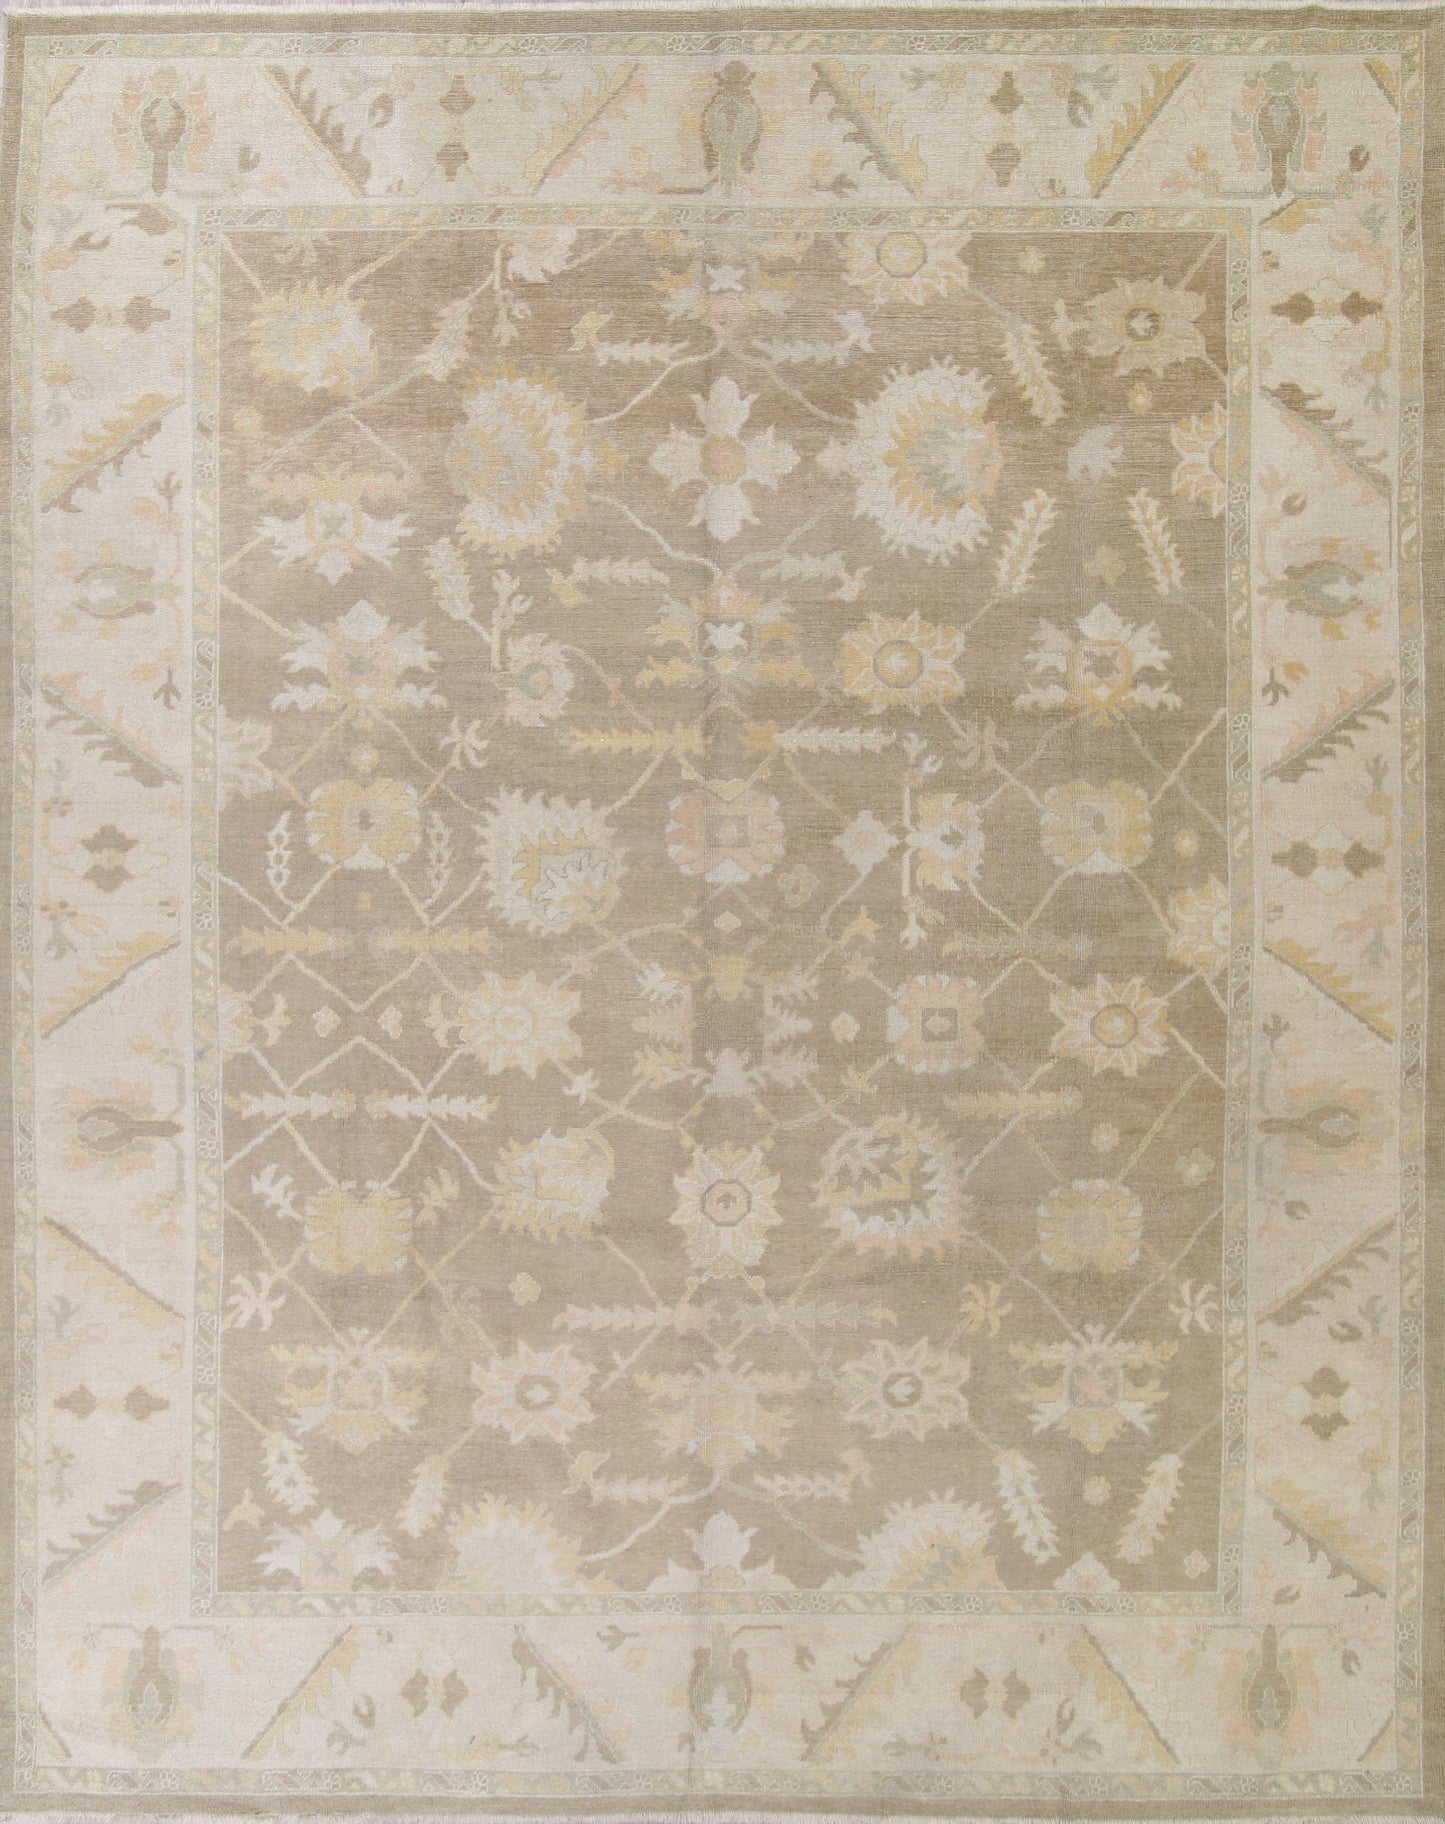 Vegetable Dye Muted Brown Oushak Turkish Hand-Knotted Area Rug 12X15